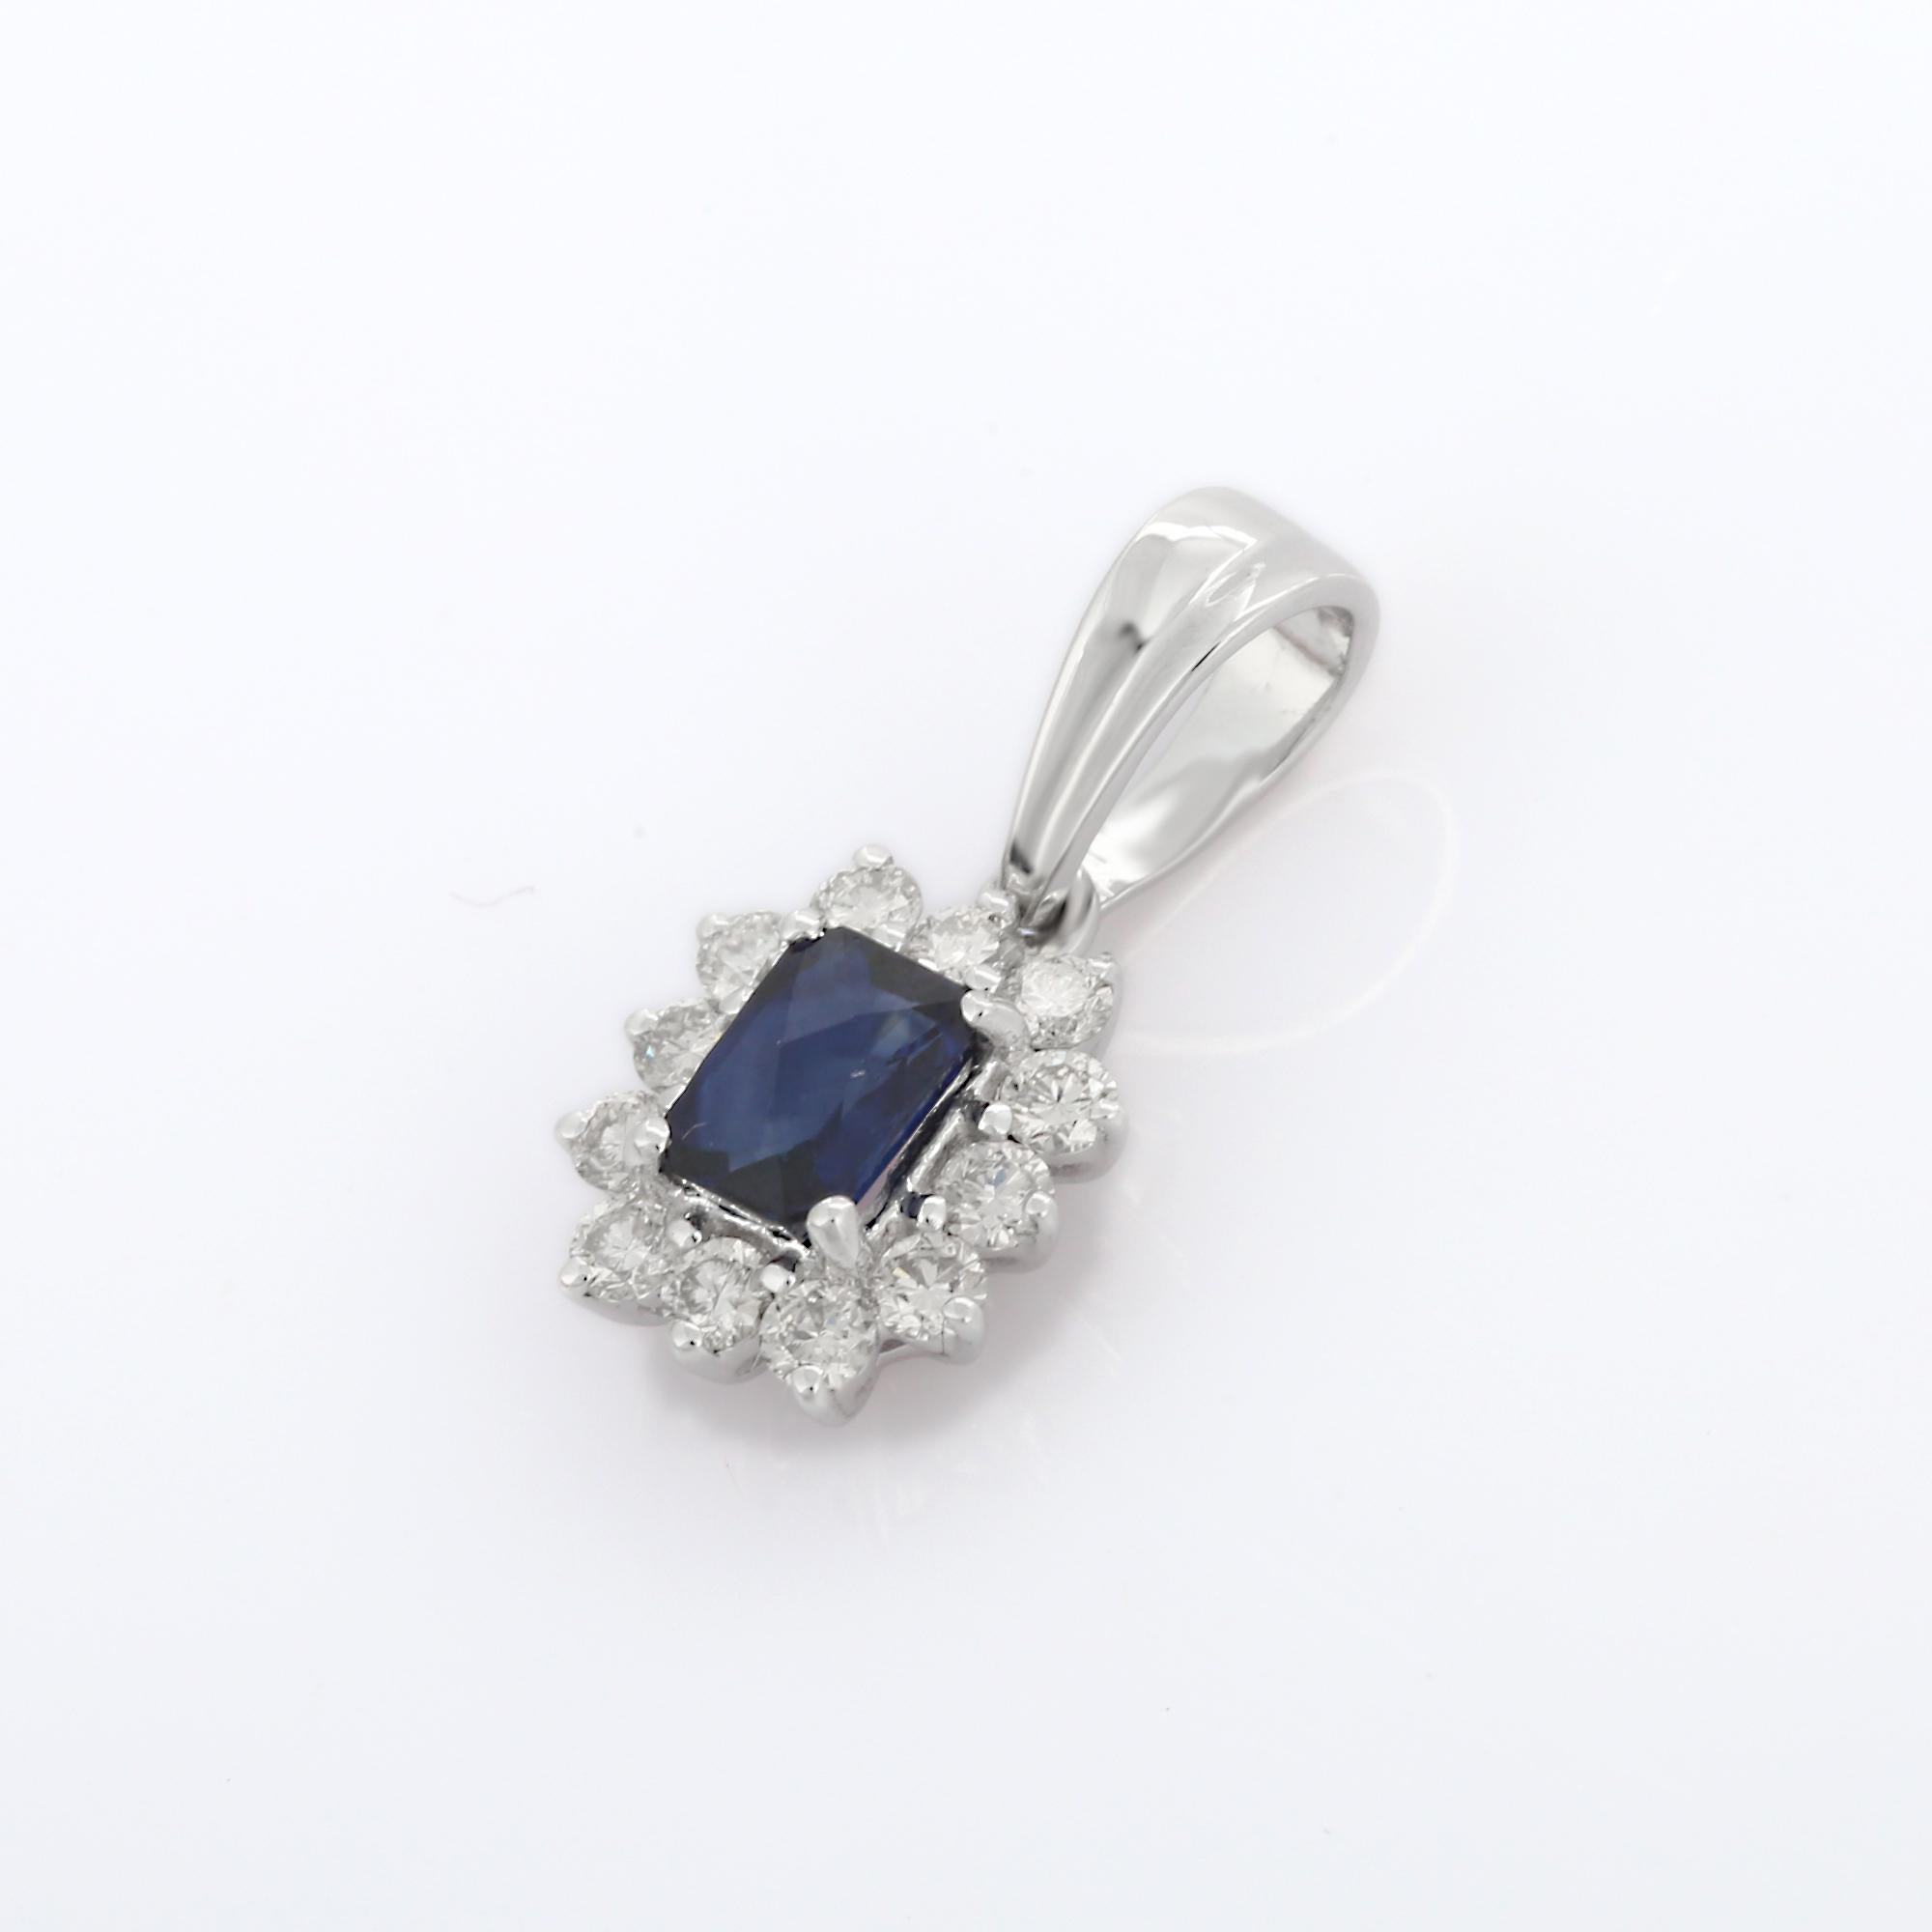 Natural Blue Sapphire pendant in 18K Gold. It has a octagon cut sapphire studded with diamonds that completes your look with a decent touch. Pendants are used to wear or gifted to represent love and promises. It's an attractive jewelry piece that